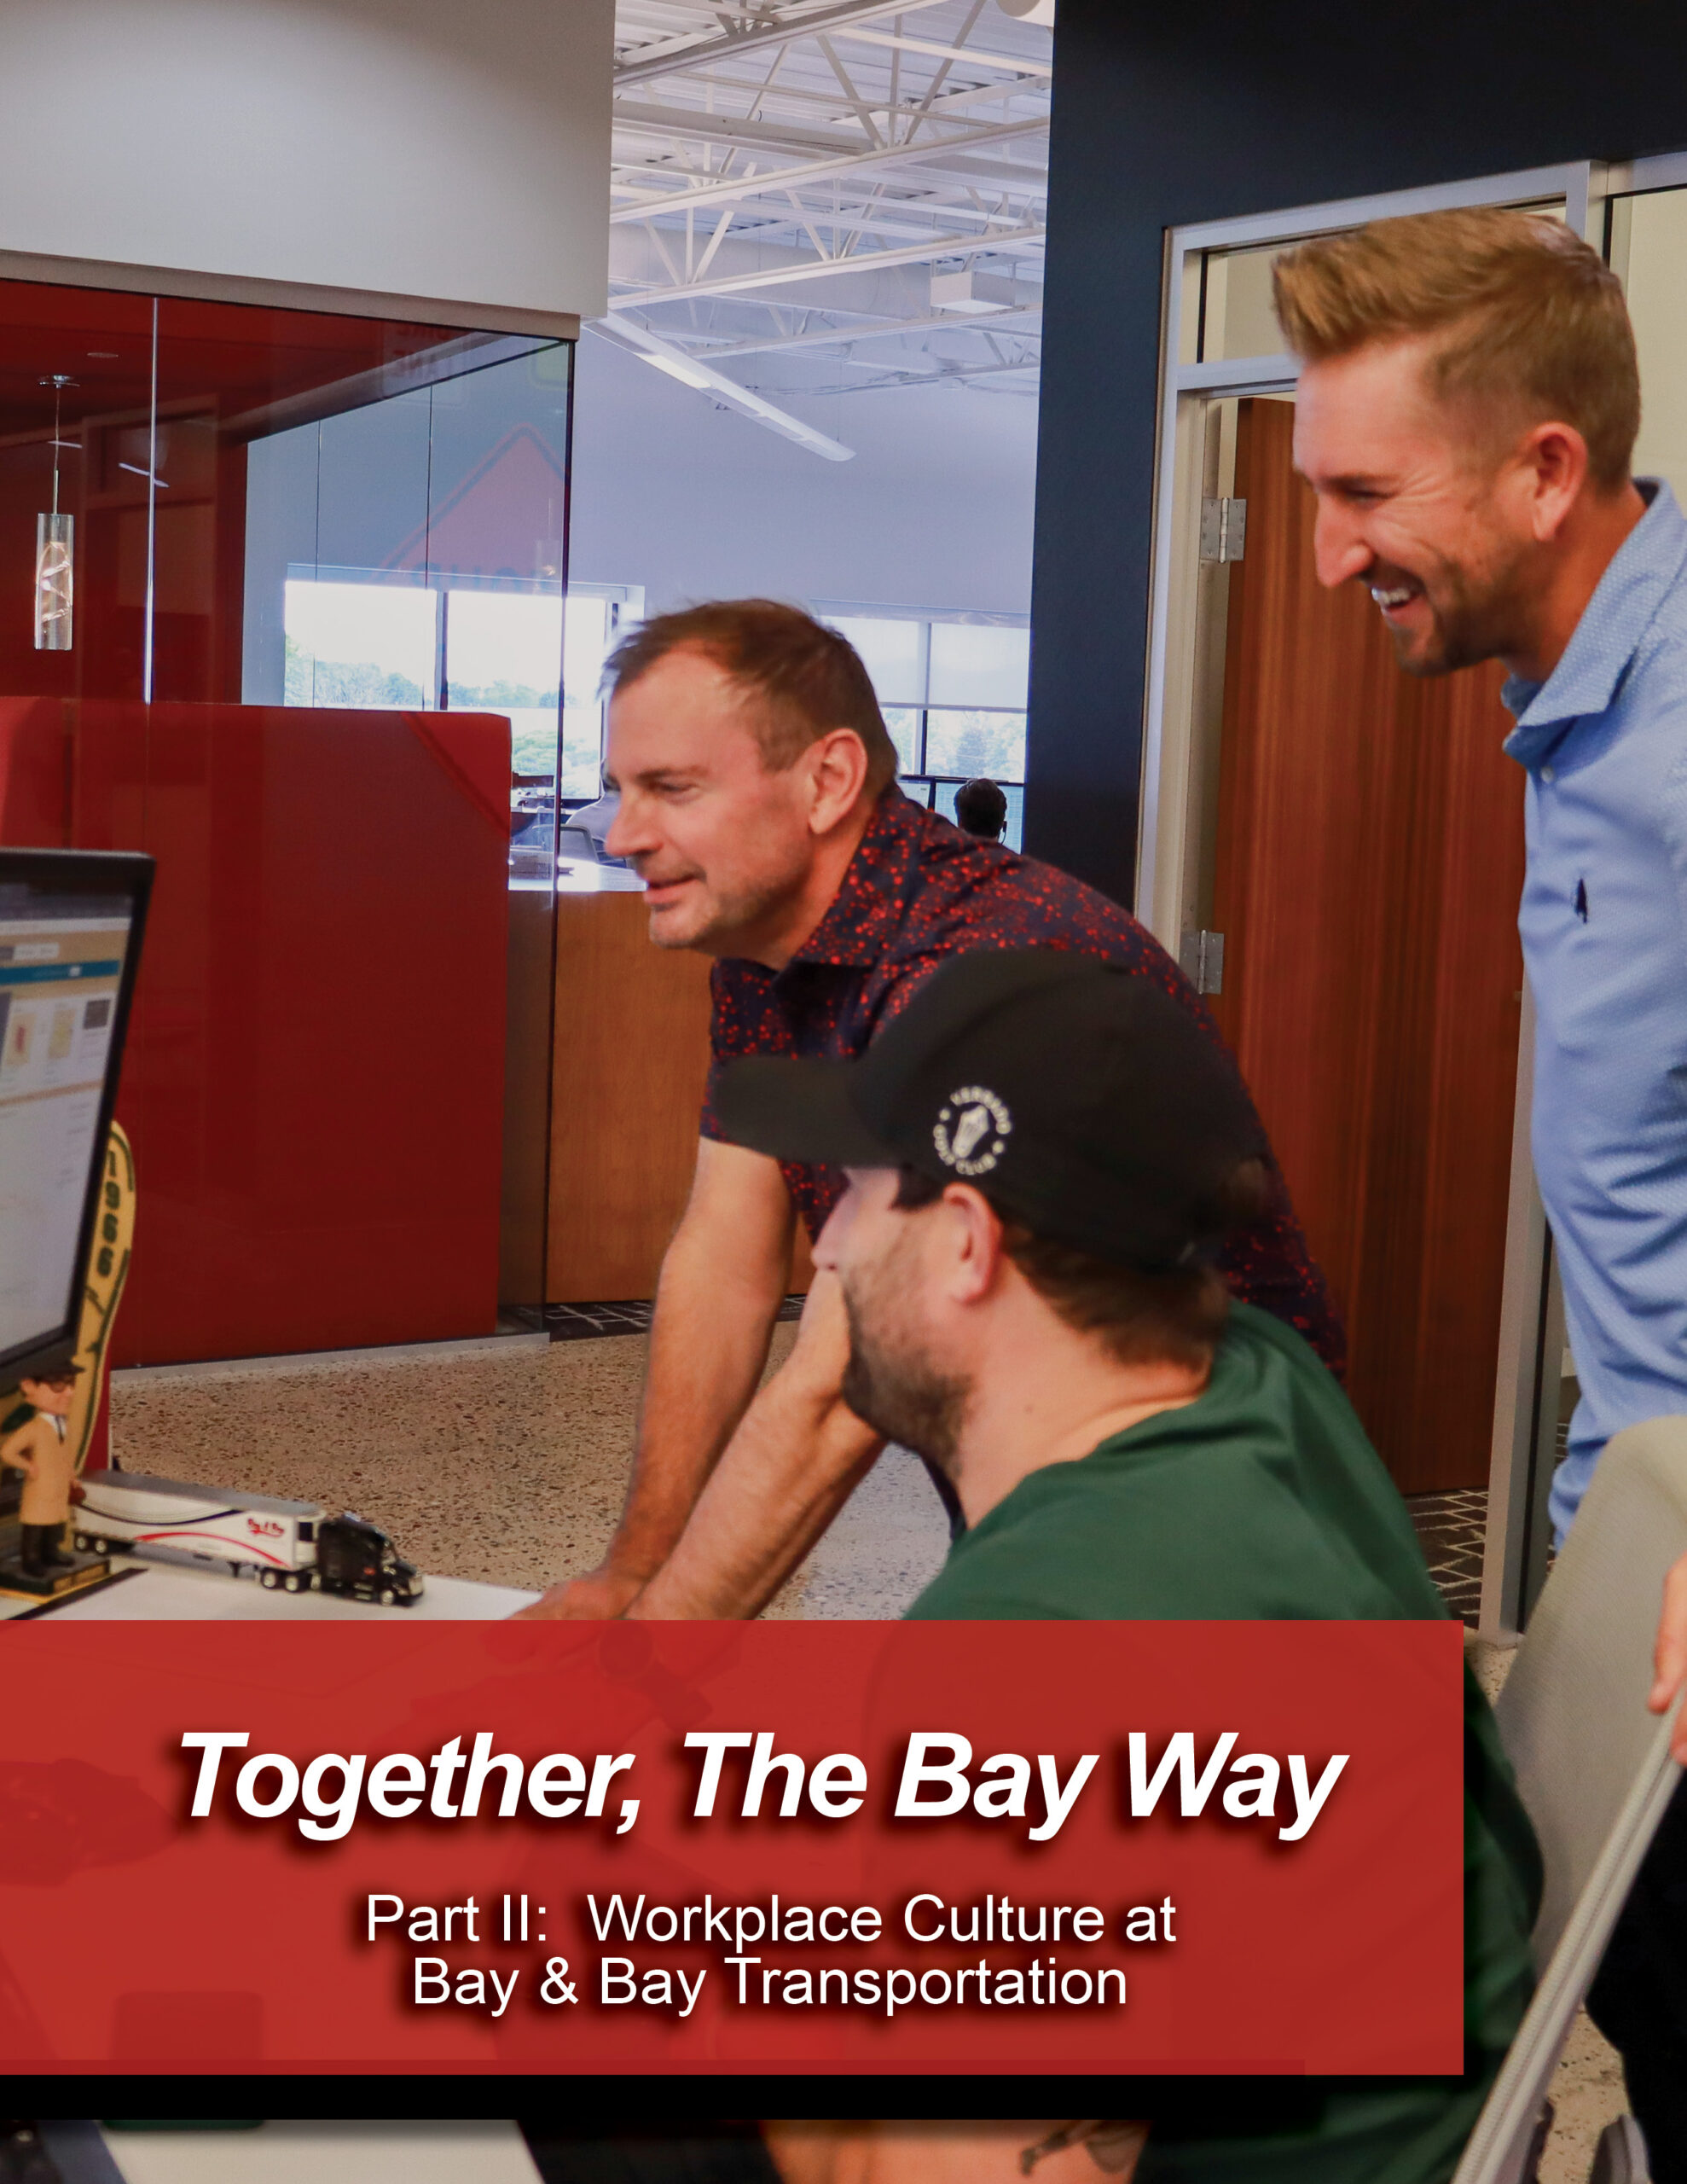 This article is the second in a two-part series that shares an inside look at the workplace culture of Bay & Bay Transportation. Part one focused on the cultural norms that attract new talent to Bay & Bay. Part two examines the factors that contribute to employee satisfaction and retention.